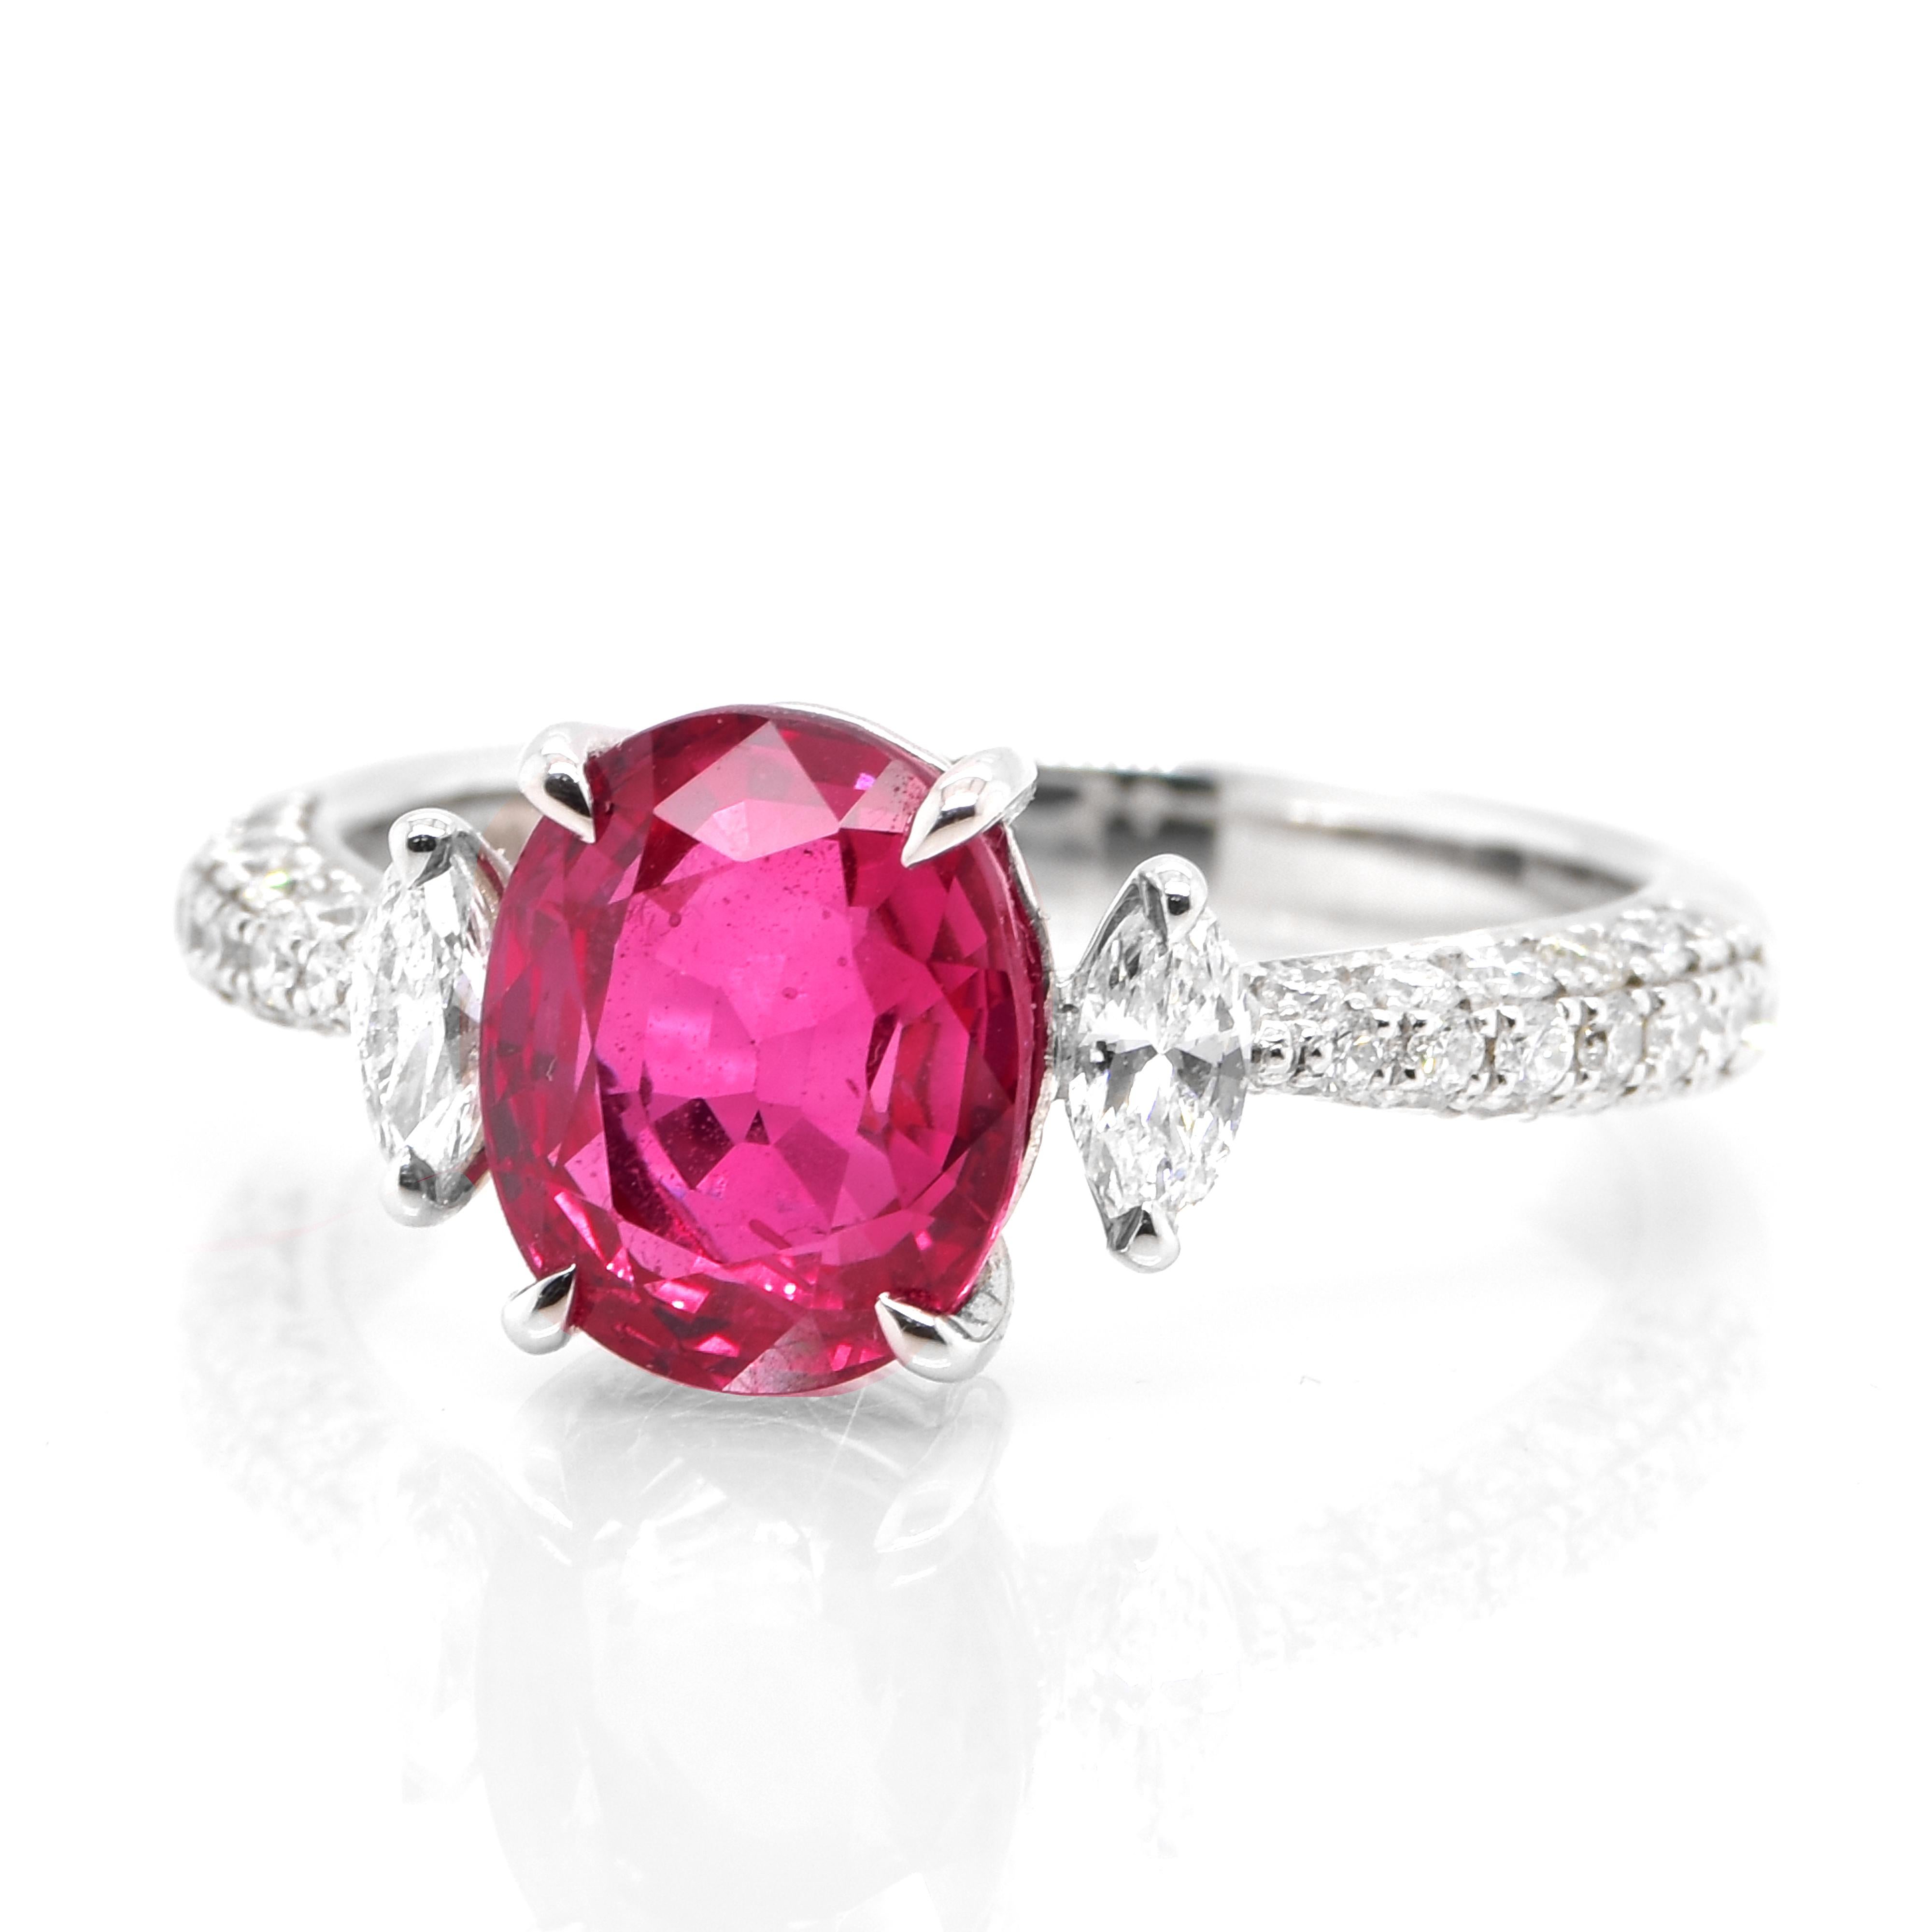 A beautiful Ring set in Platinum featuring a GIA Certified 3.17 Carat Natural Siam Ruby and 0.52 Carat Diamonds. Rubies are referred to as 